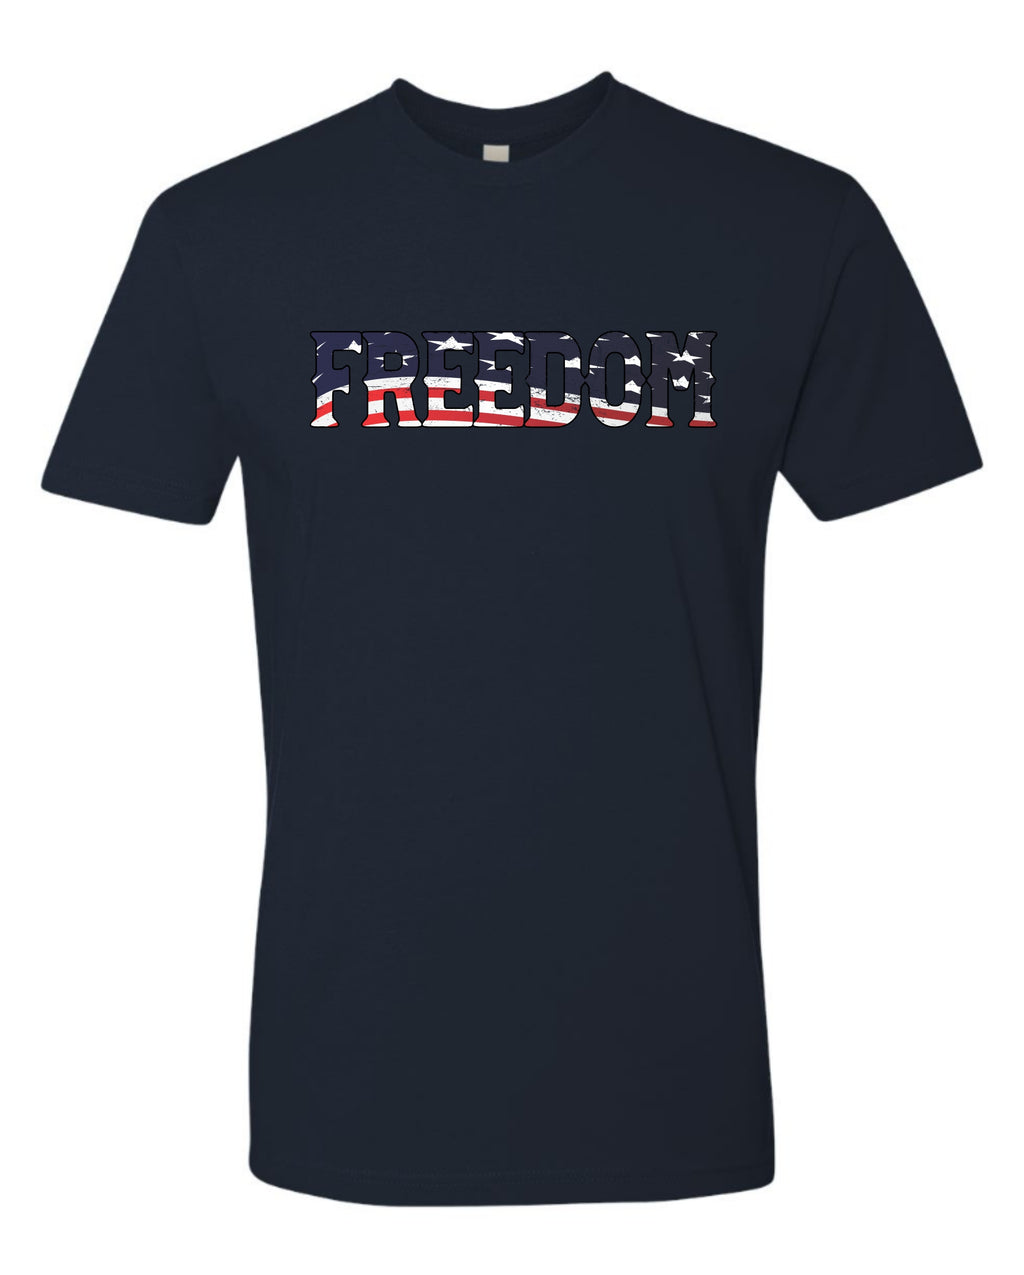 Freedom - Shirts for Men